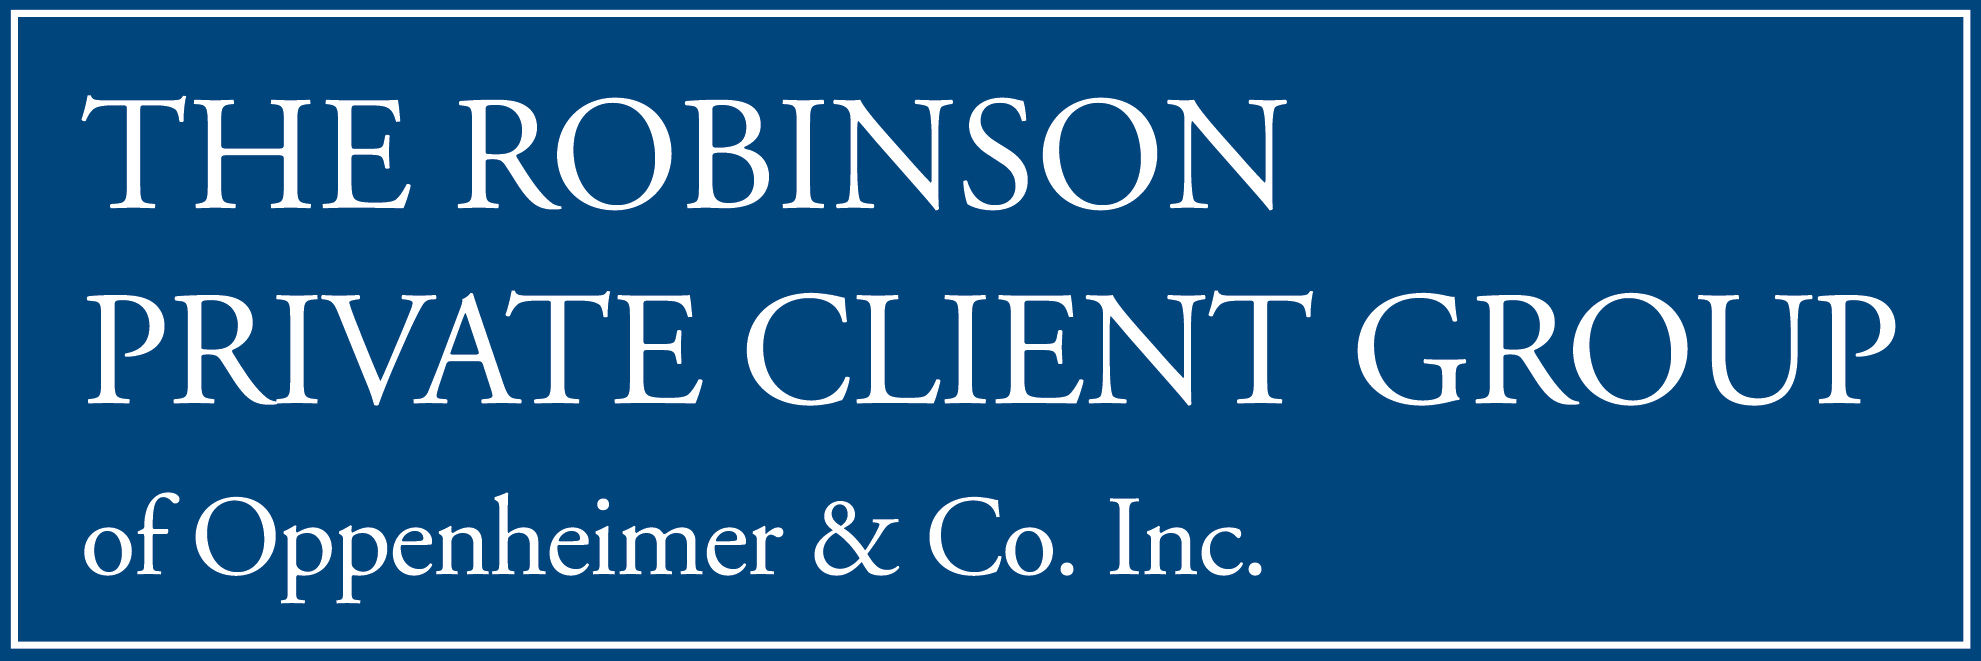 The Robinson Private Client Group